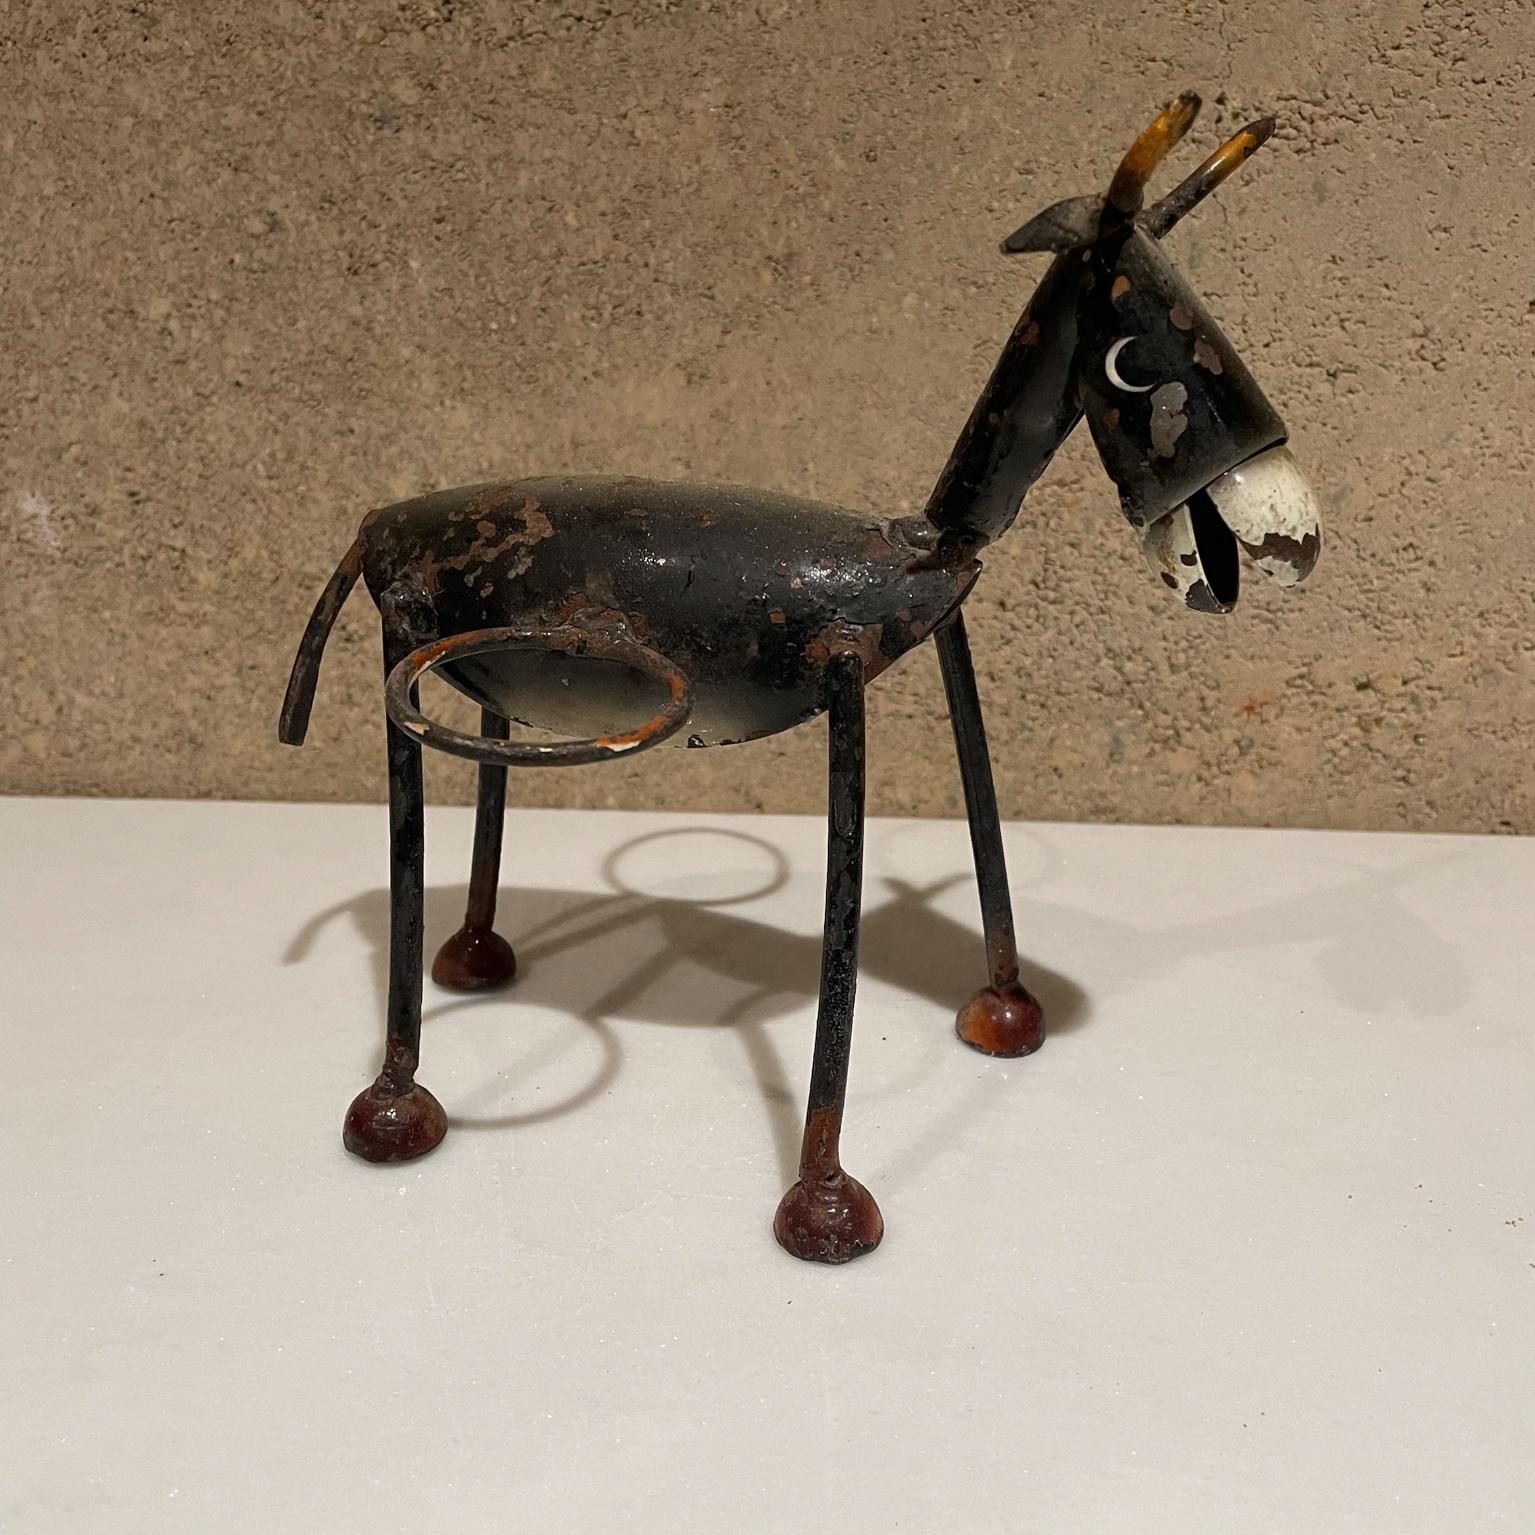 Donkey
1970s after Manuel Felguerez Modernist Handmade Donkey Valet Mexico
Metal painted adorable donkey valet with two rings for napkins or salt & pepper shakers! Ideal napkin holder kitchen caddy miscellaneous storage.
Unmarked, inspiration